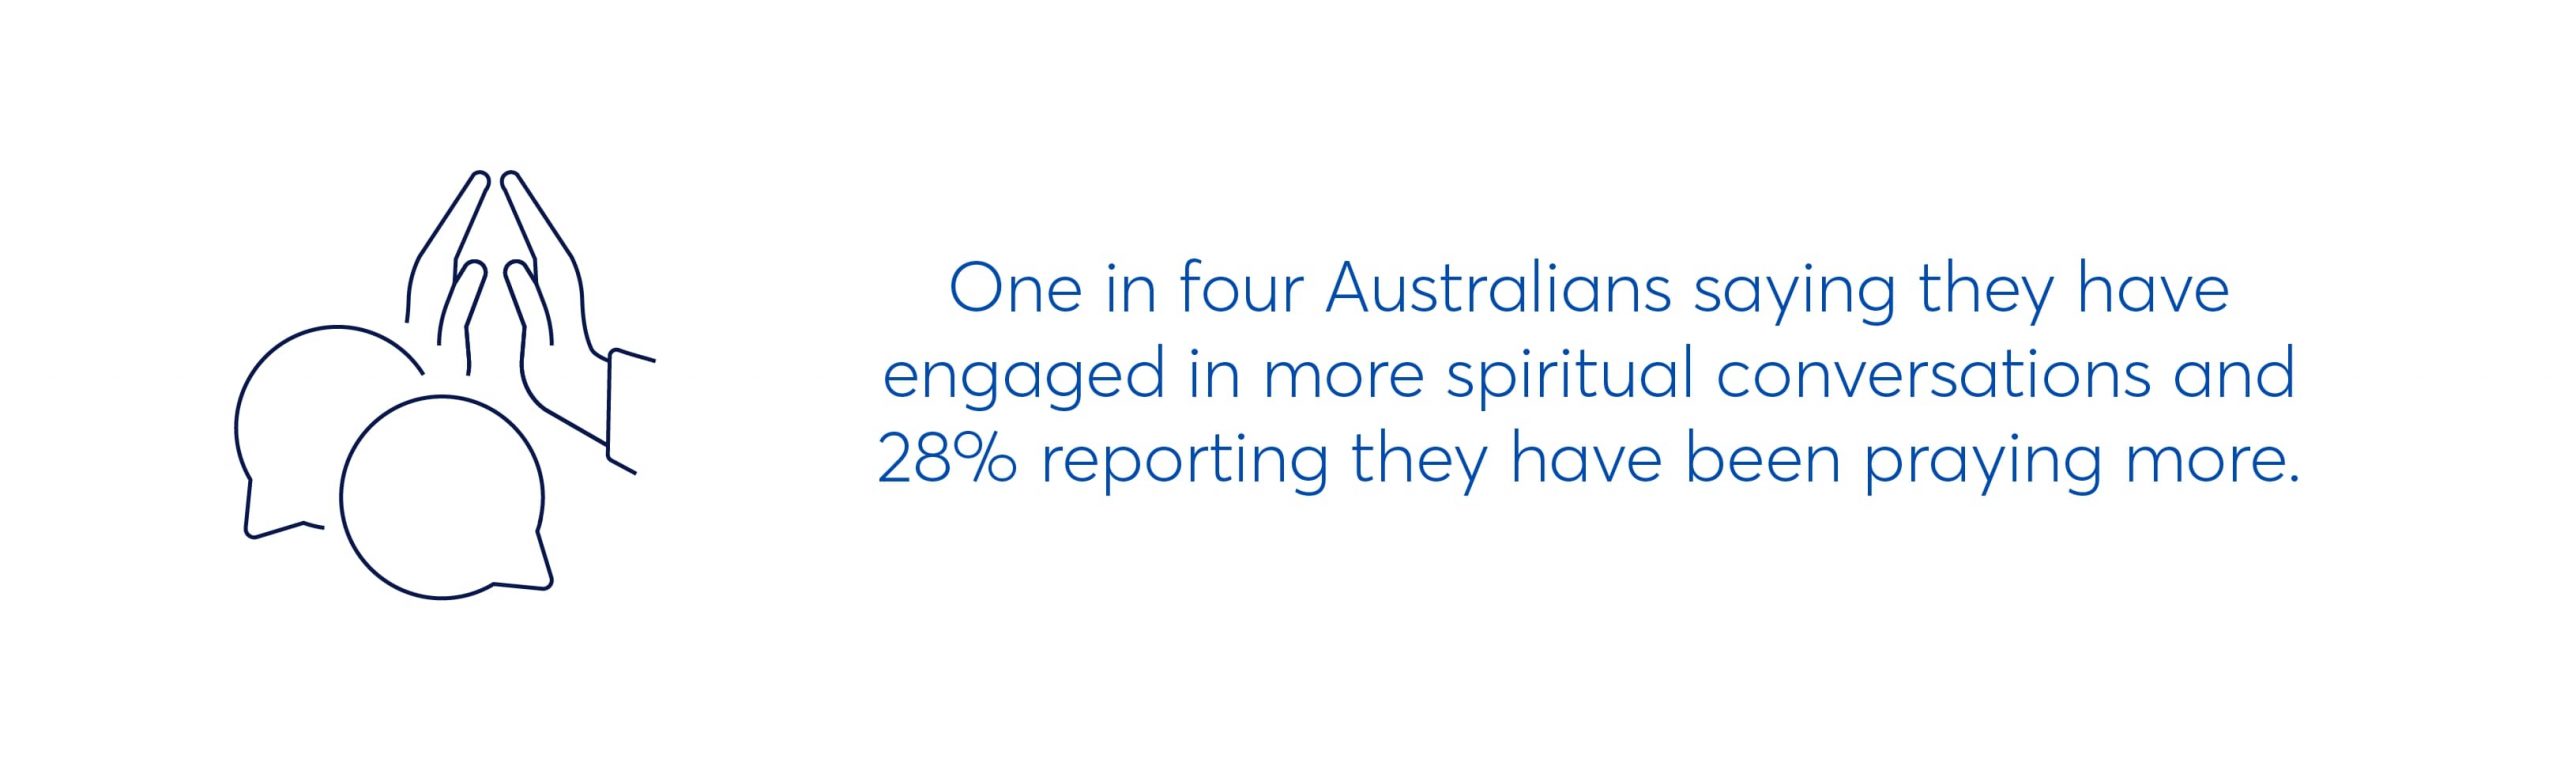 one in four australians saying they have engaged in more spiritual conversations and 28% reporting they have been praying more.